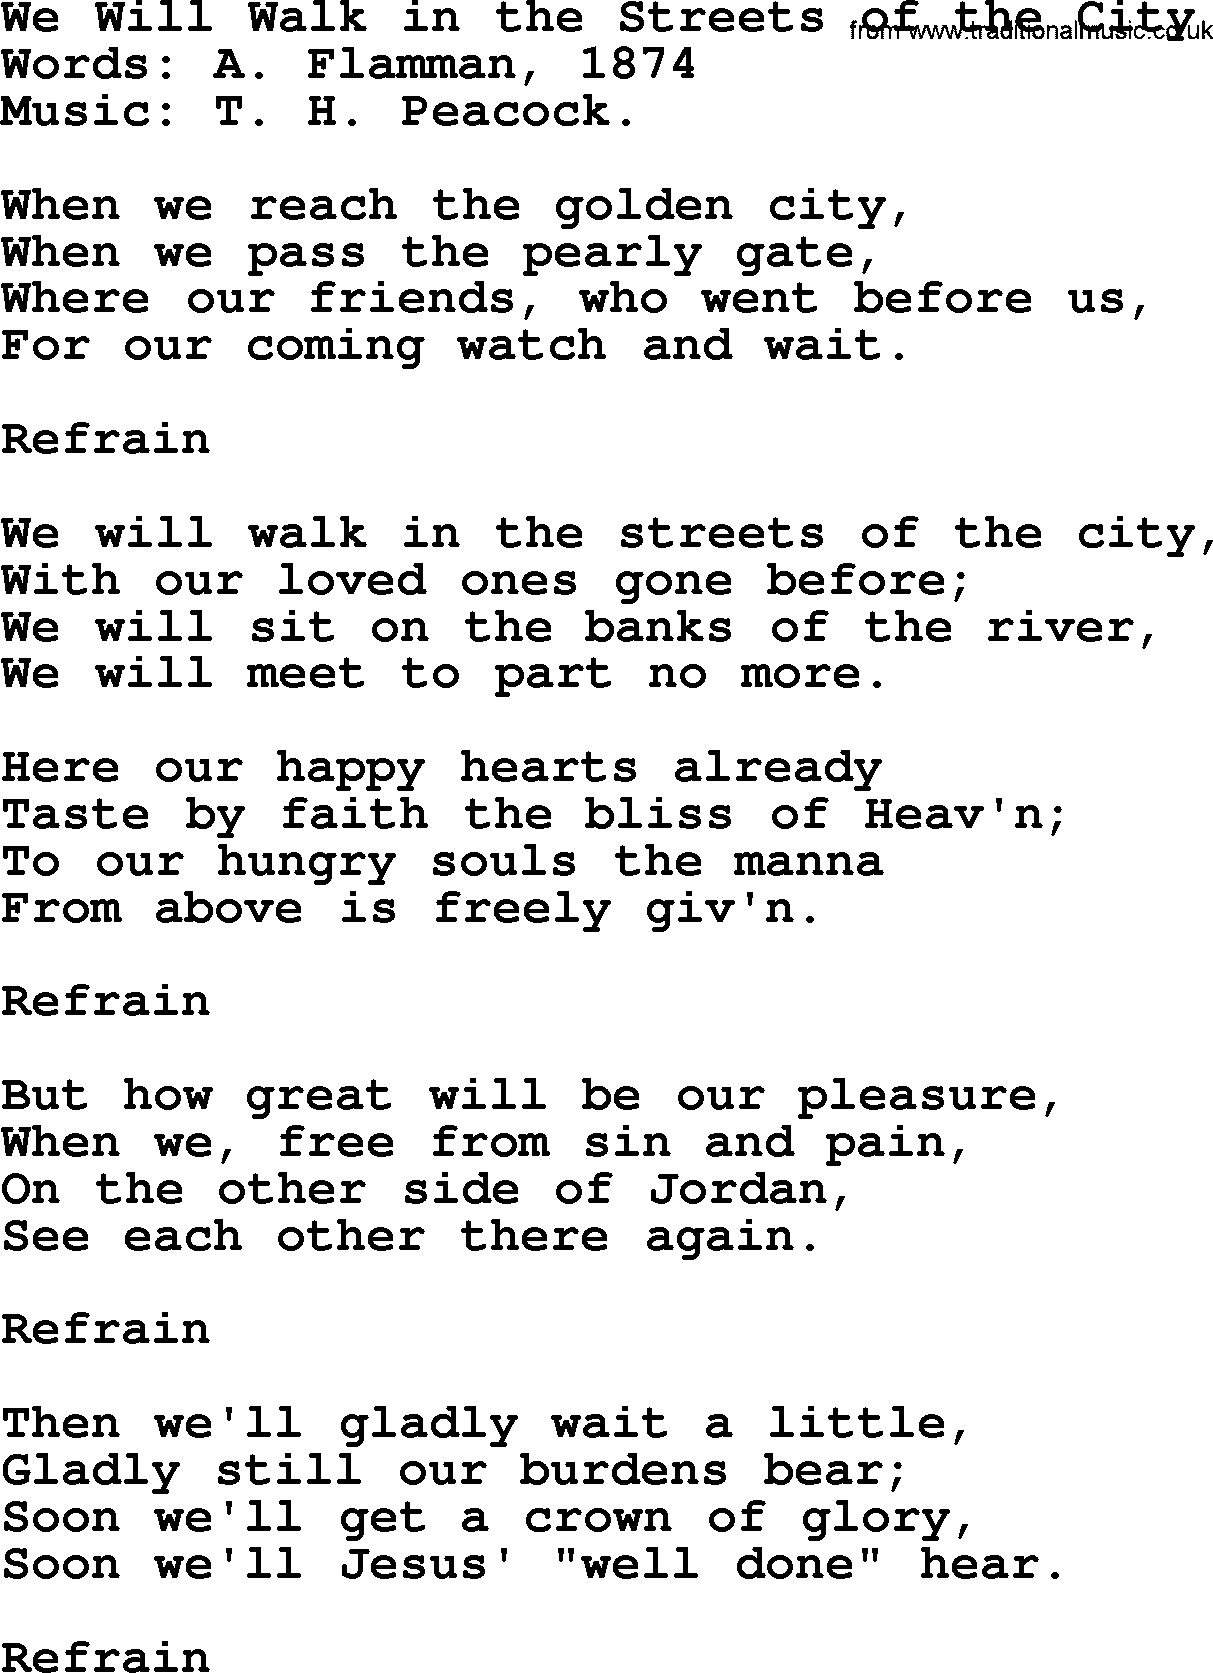 Songs and Hymns about Heaven: We Will Walk In The Streets Of The City lyrics with PDF